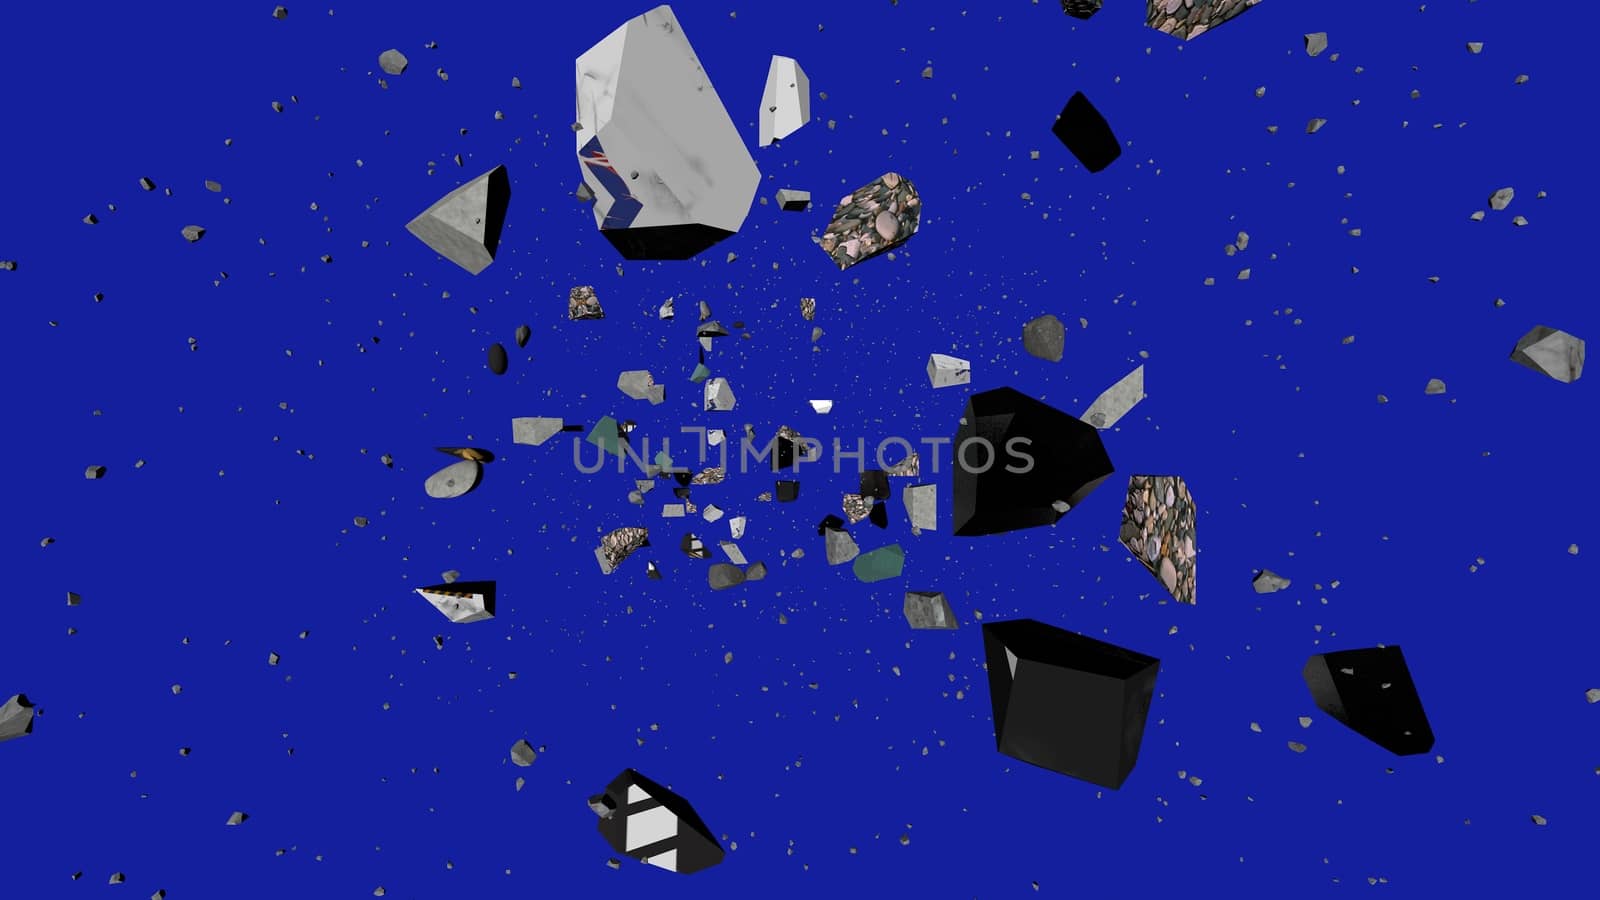 Spellbinding 3d rendering of black and grey asteroid stones circling and flying towards tiny stars in the blue universe. It looks impressive and dramatic.